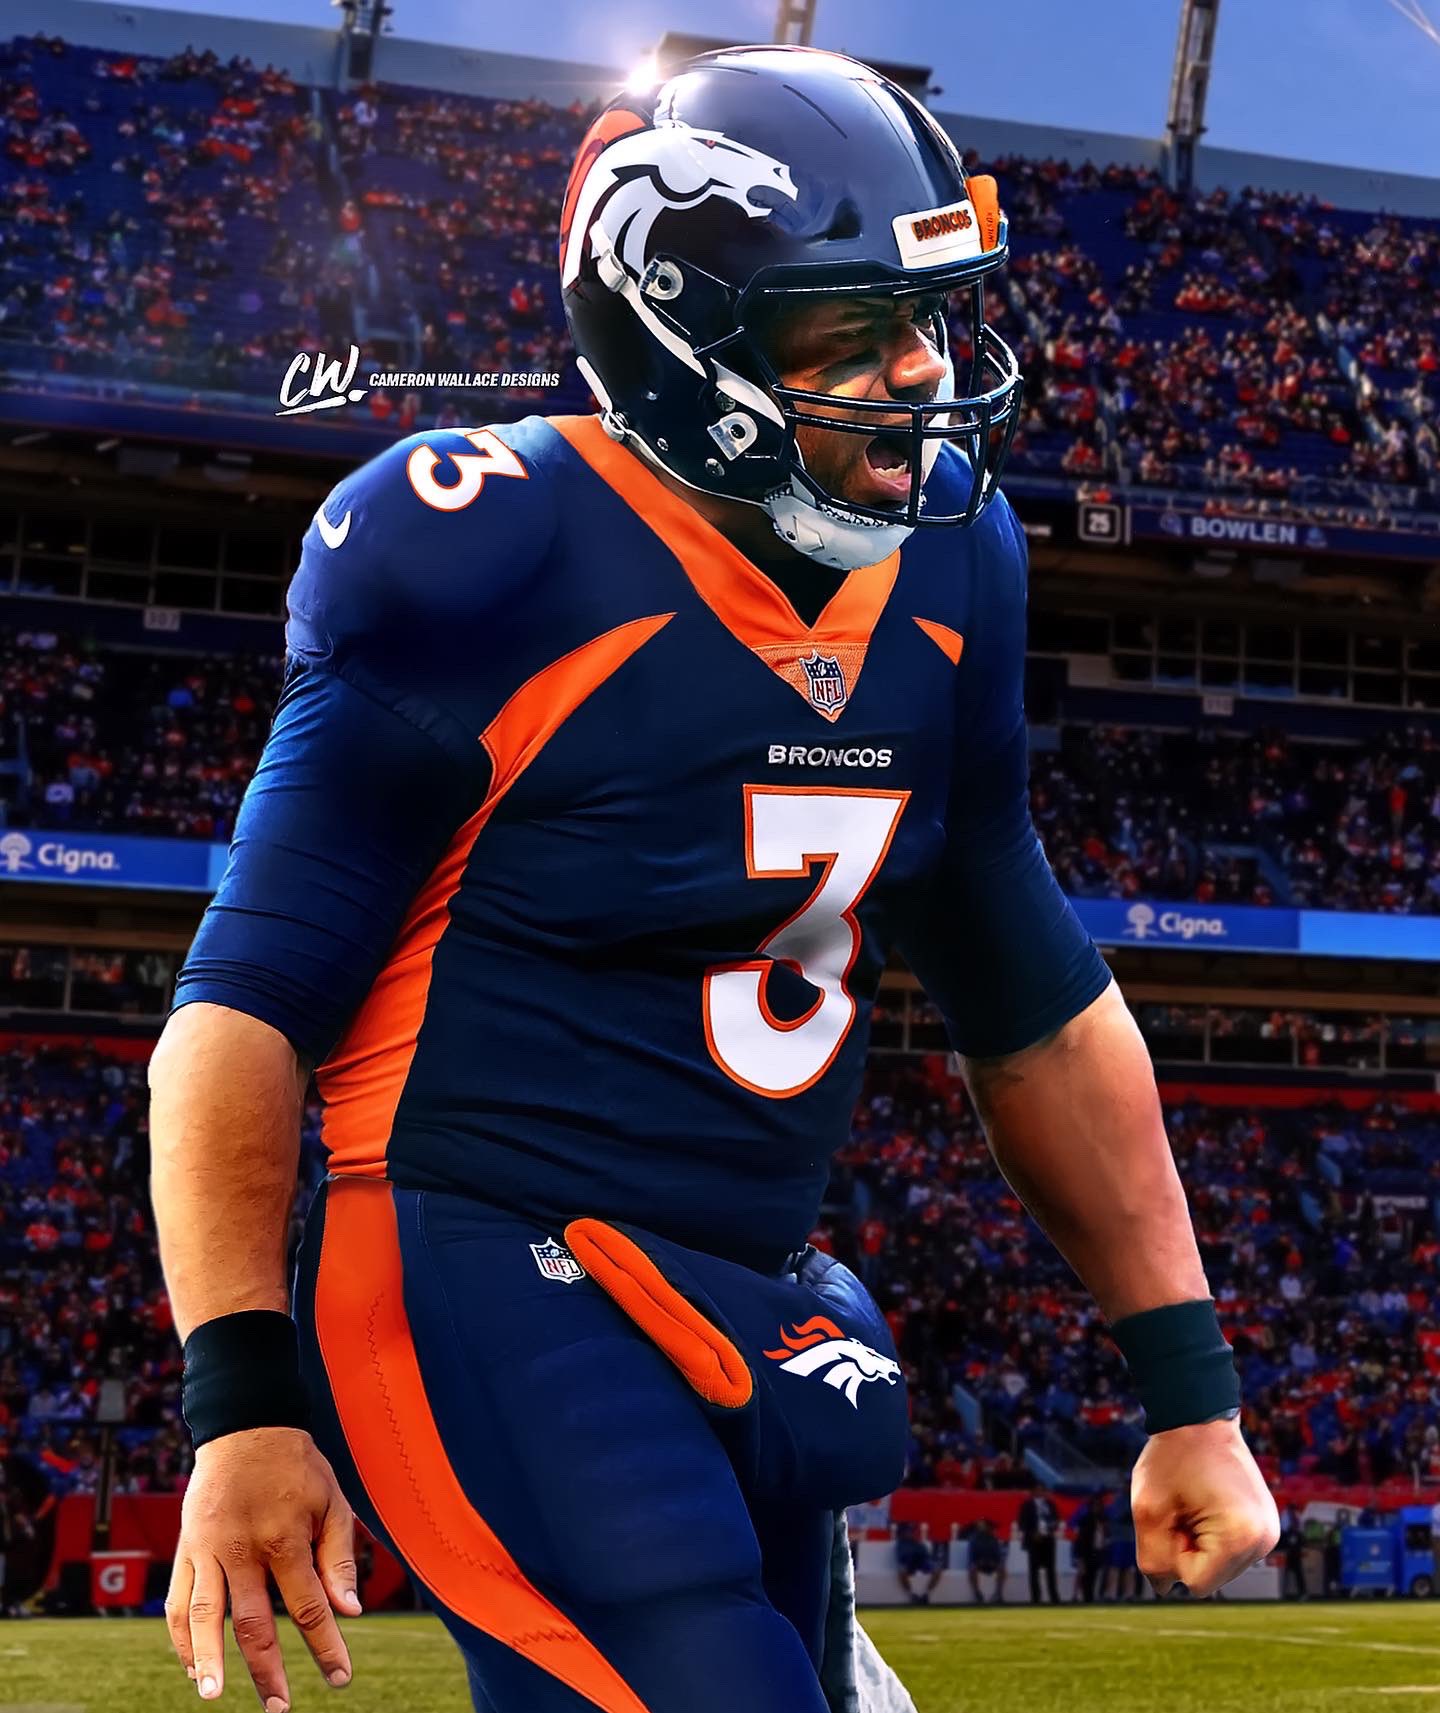 Cameron Wallace Designs Twitterren:. is the new QB for Broncos How will Russell Wilson do in the Mile High City? #RussellWilson # Broncos #BroncosCountry